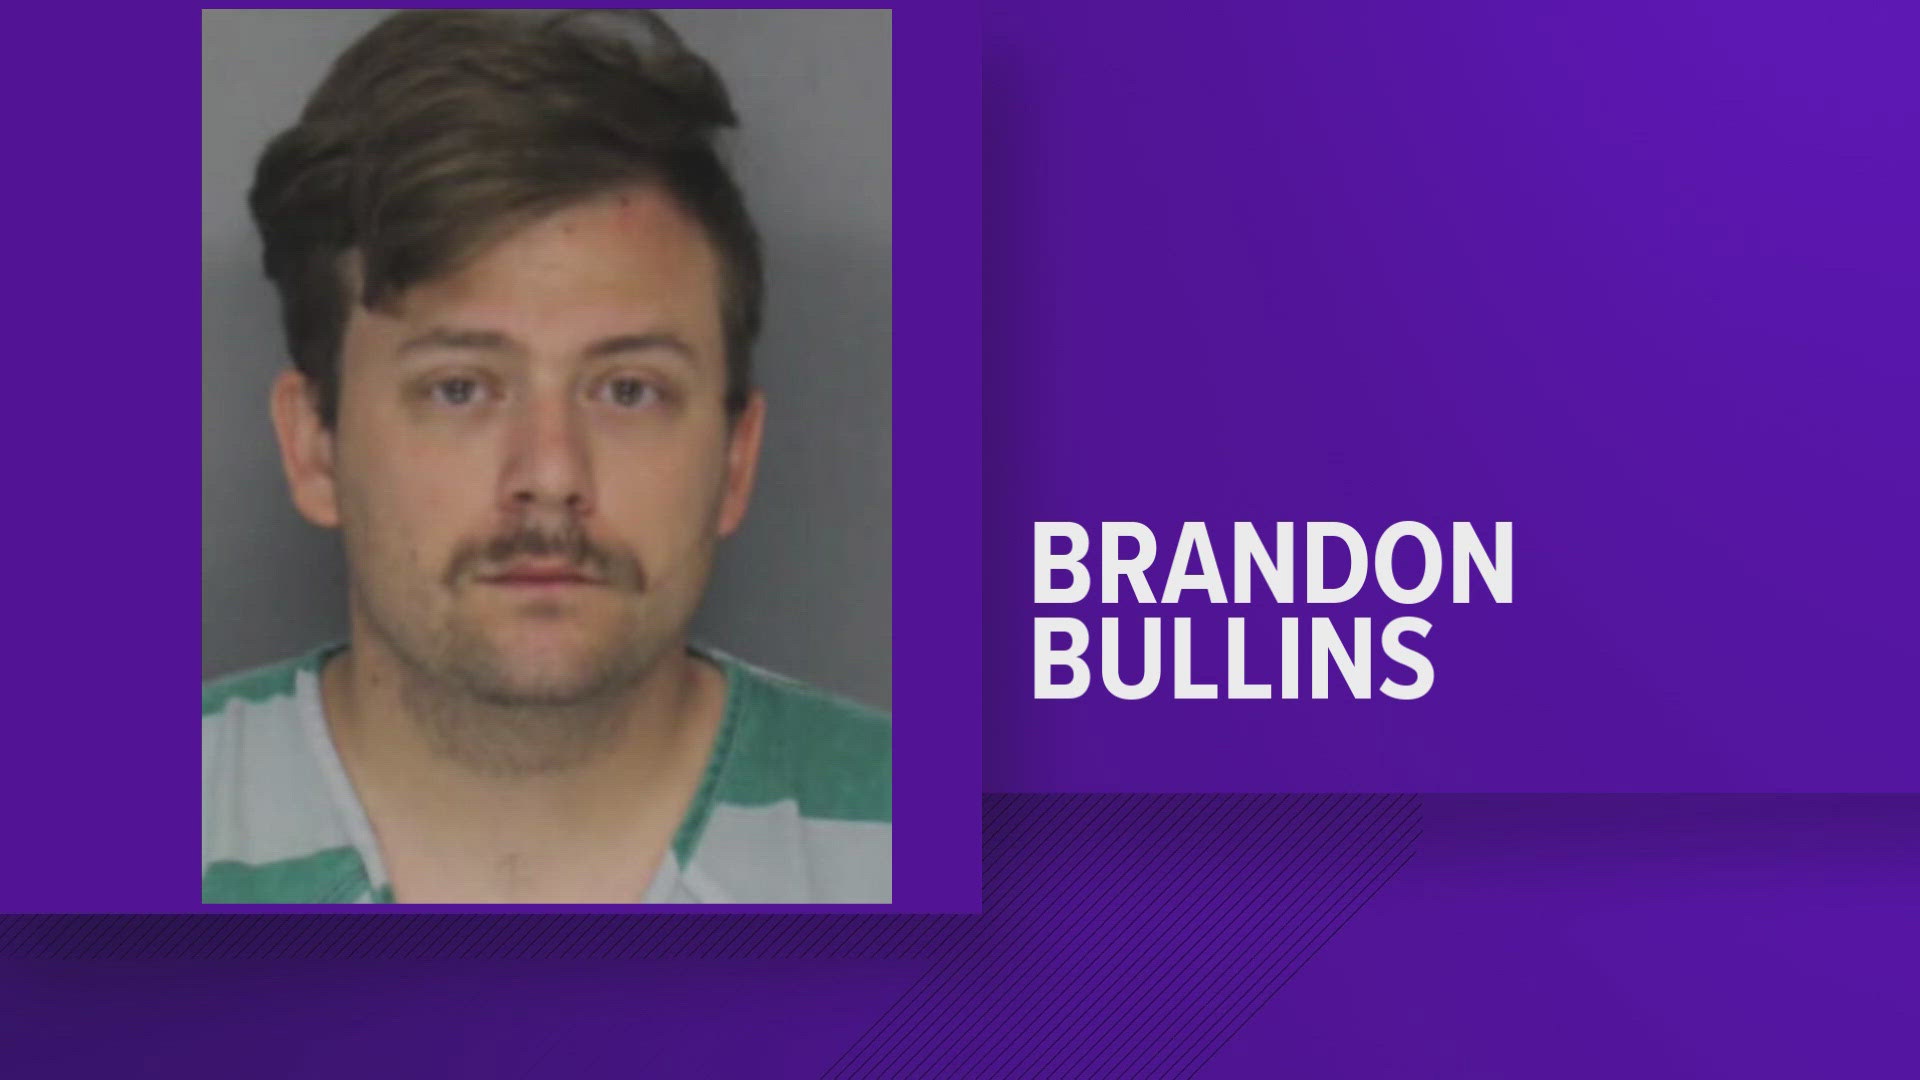 The Jefferson County Sheriff's Office said Brandon Bullins was arrested for domestic assault on June 19 and was taken to the county's detention center.